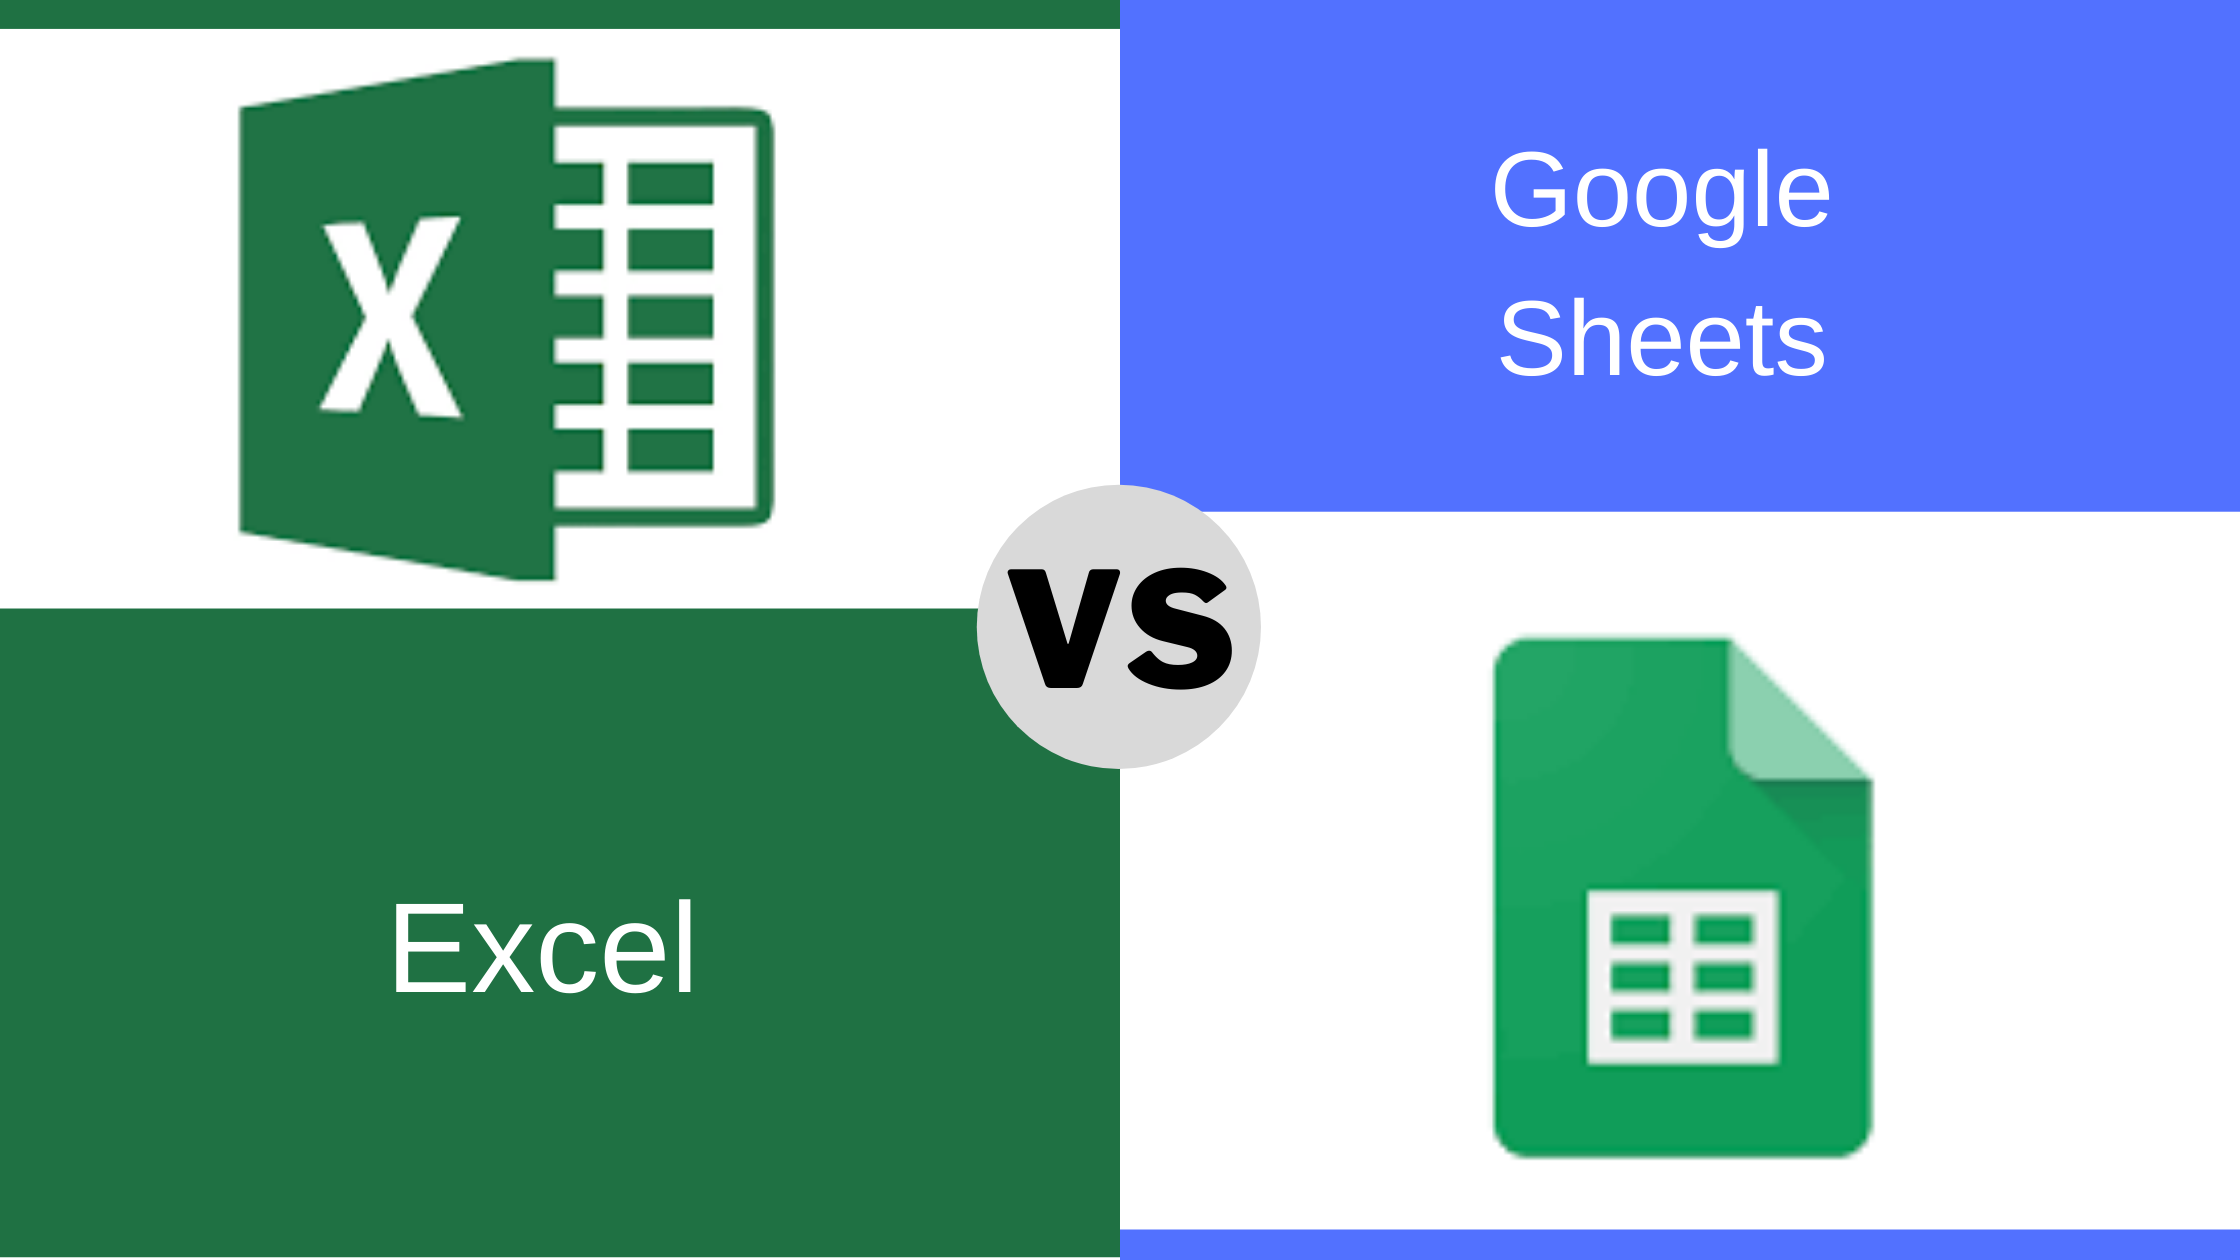 Microsoft Excel vs. Google Sheets: Which One’s Better for Business?